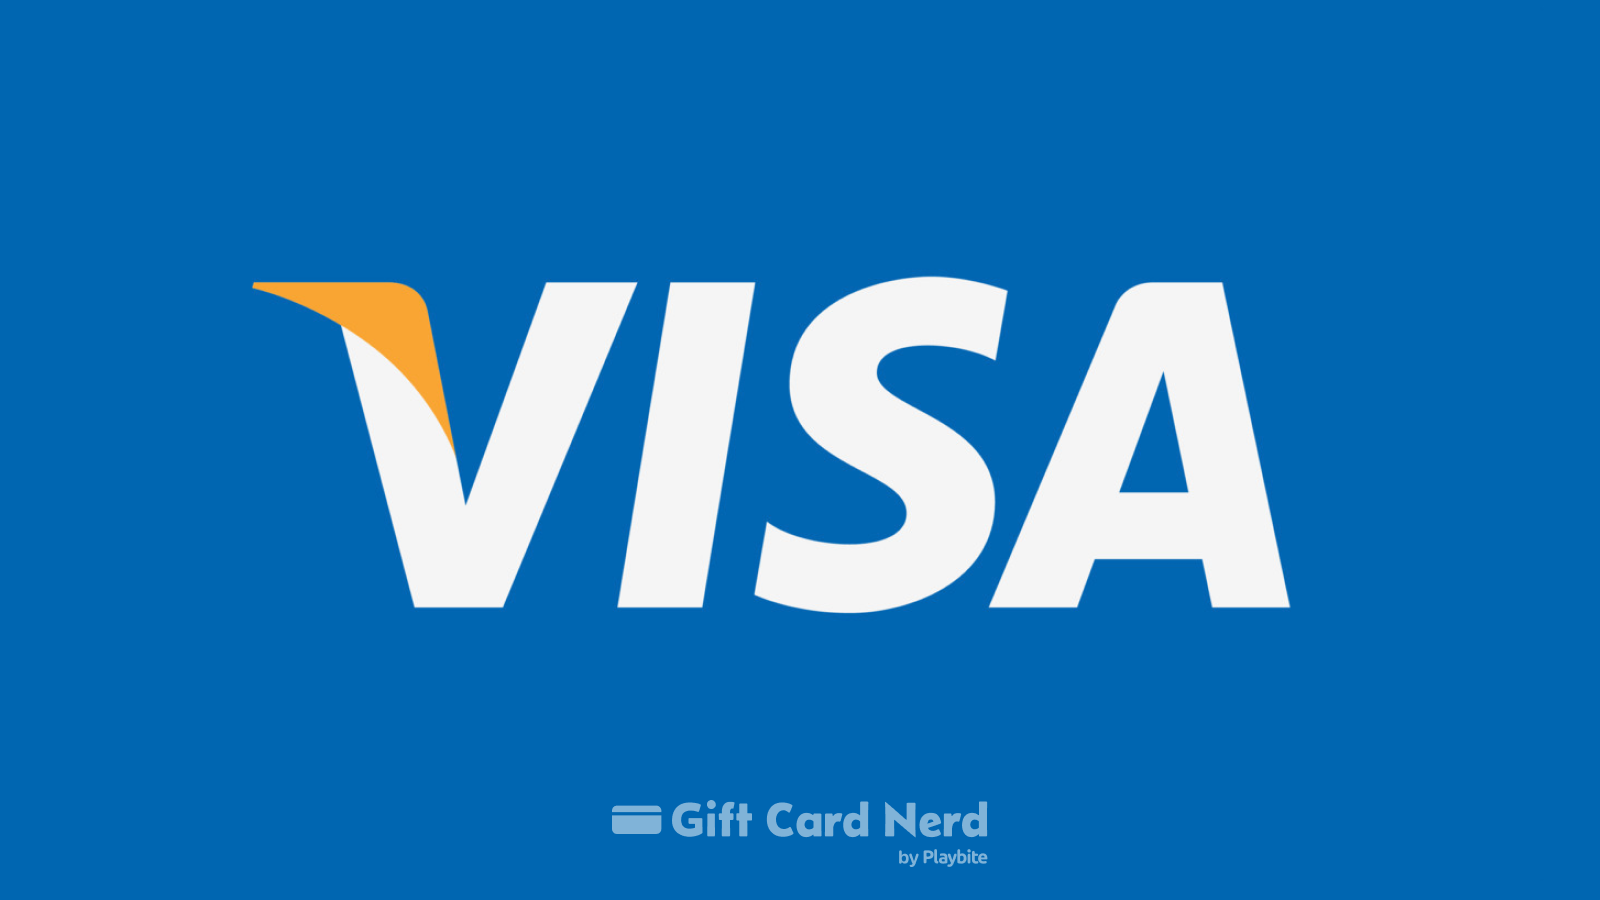 Can I use a Visa gift card on Cash app?